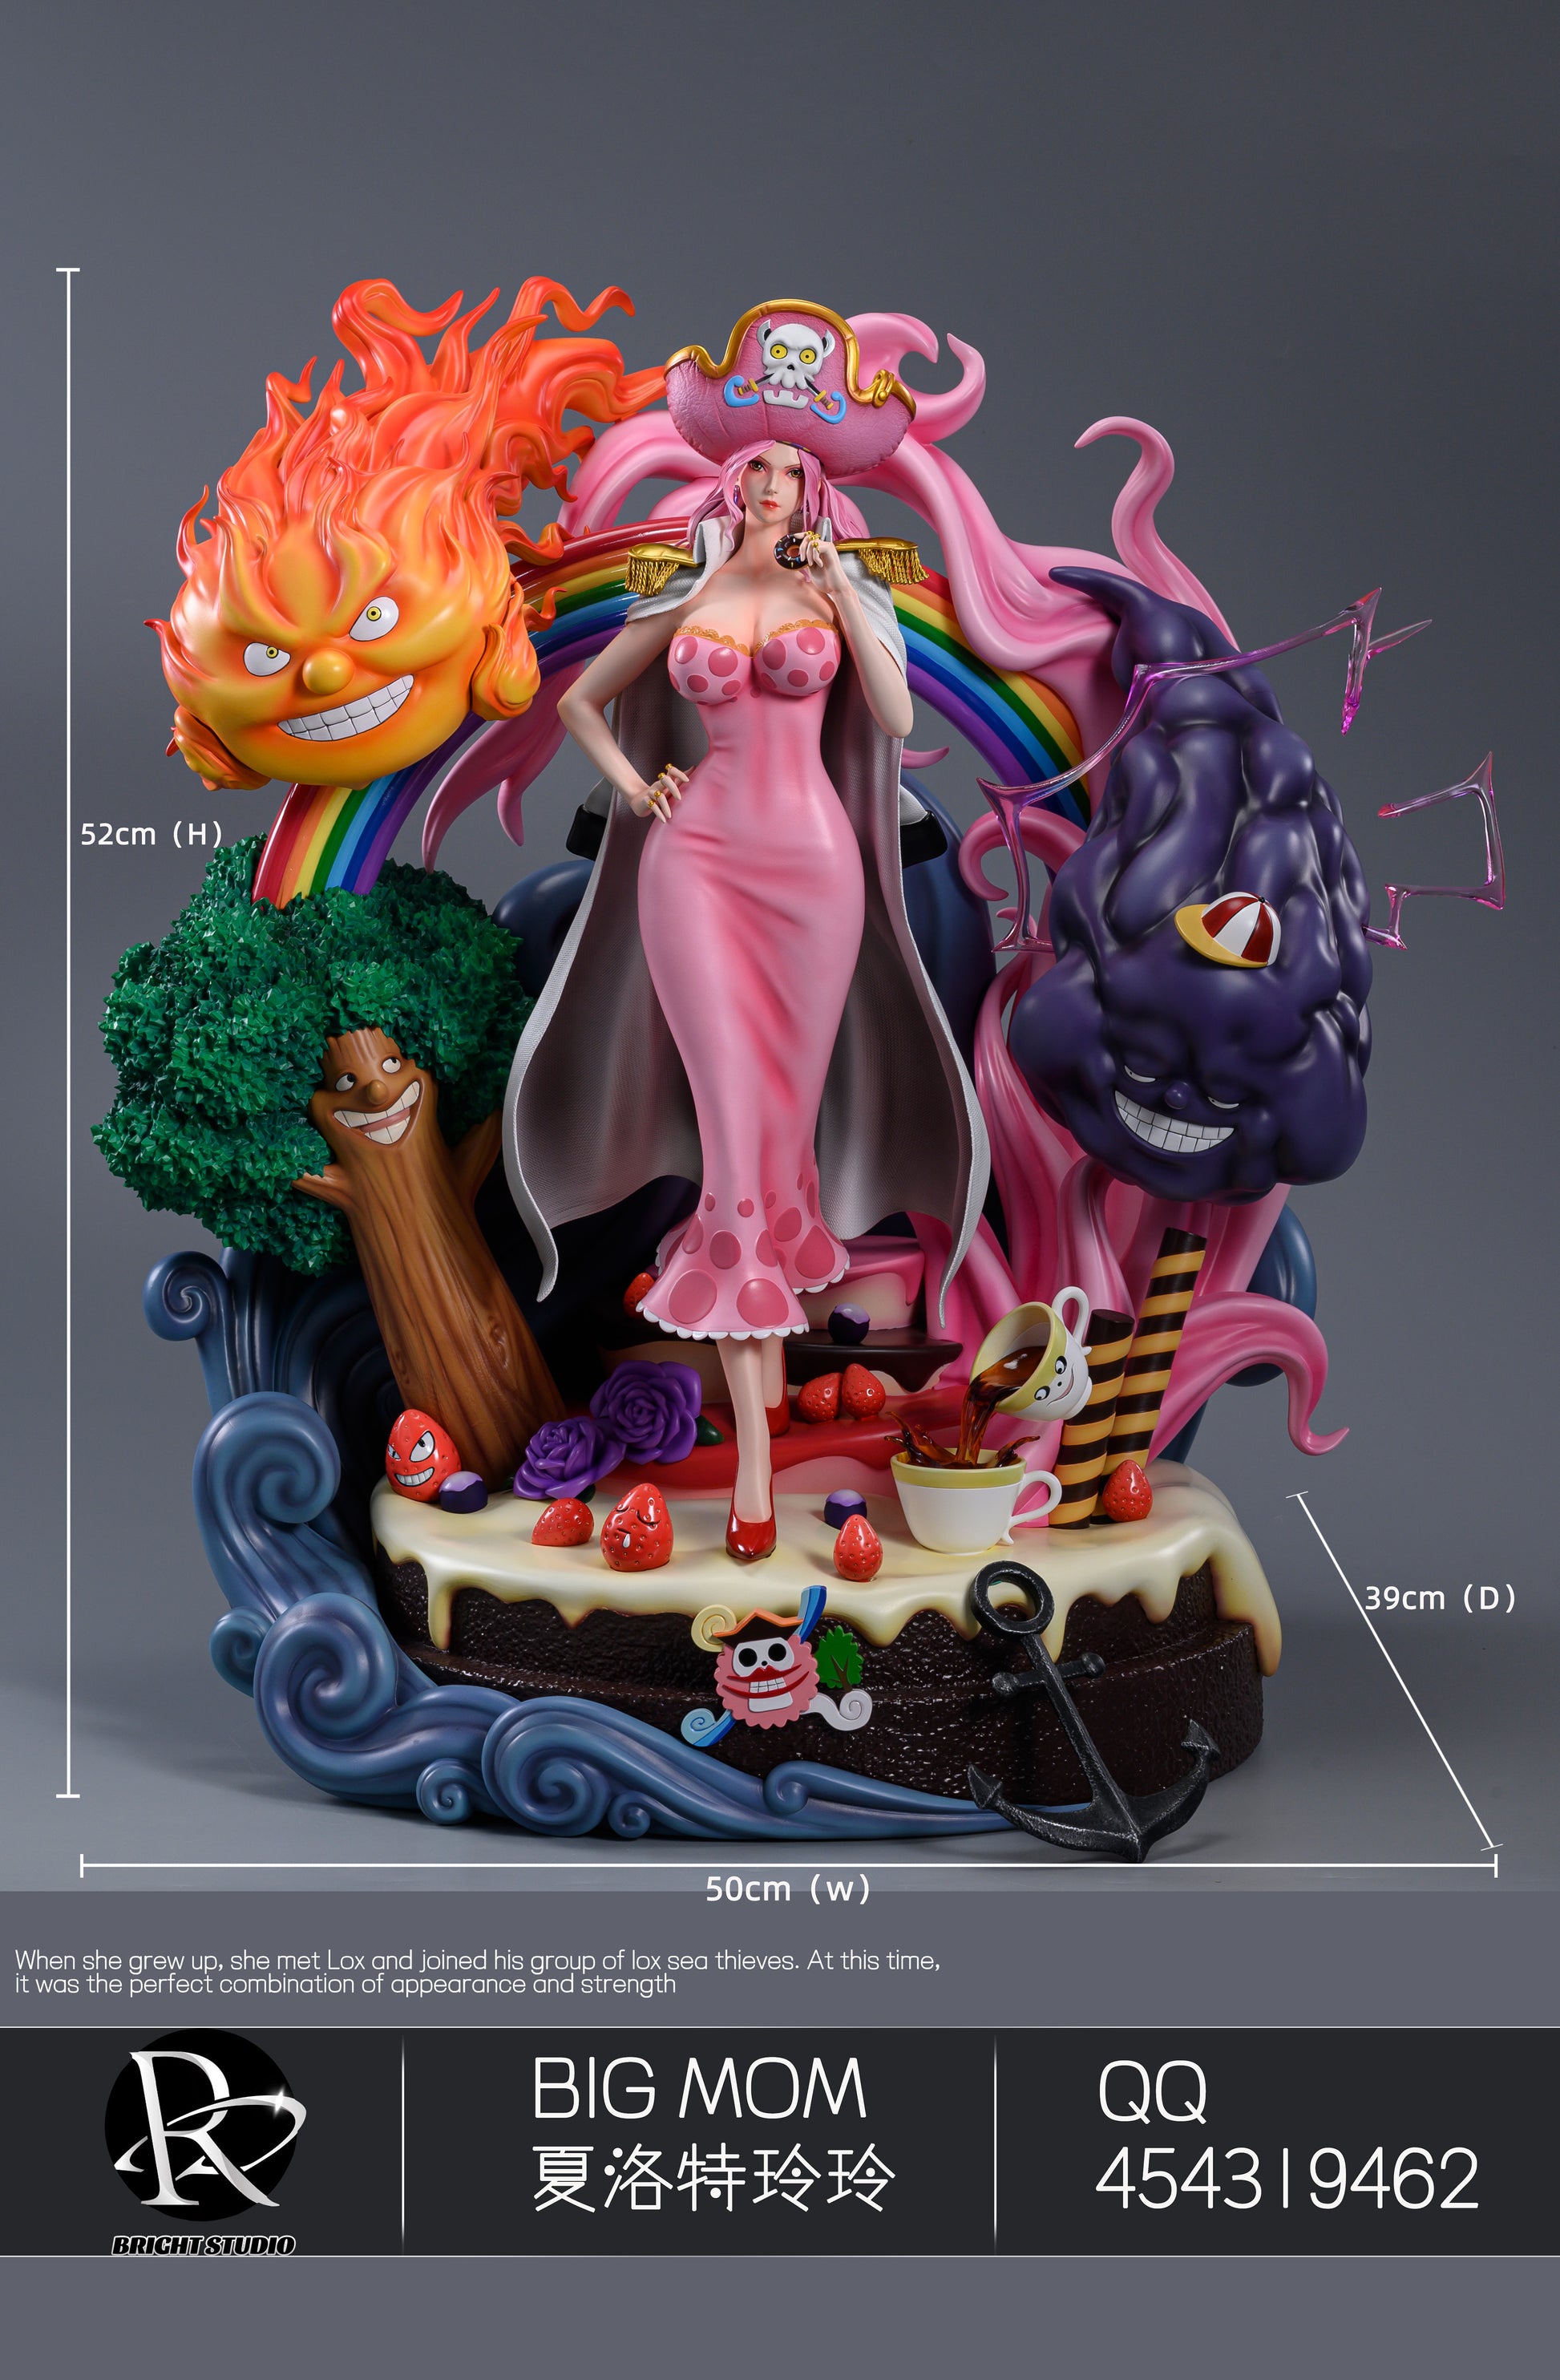 BRIGHT STUDIO – ONE PIECE: YOUNG “BIG MOM” CHARLOTTE LINLIN [SOLD